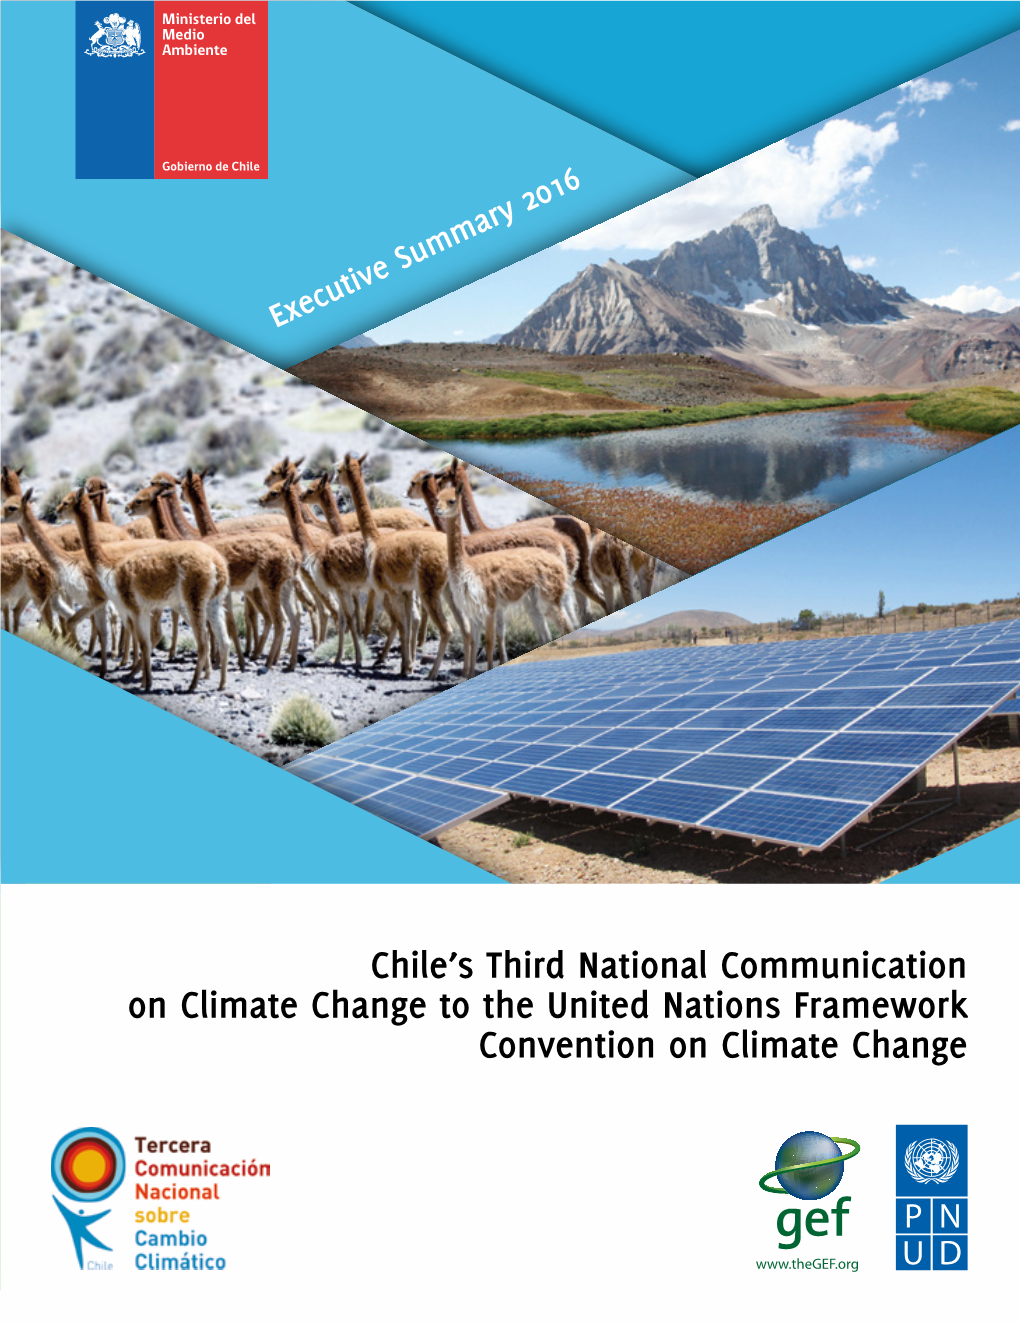 Chile's Third National Communication on Climate Change to the United